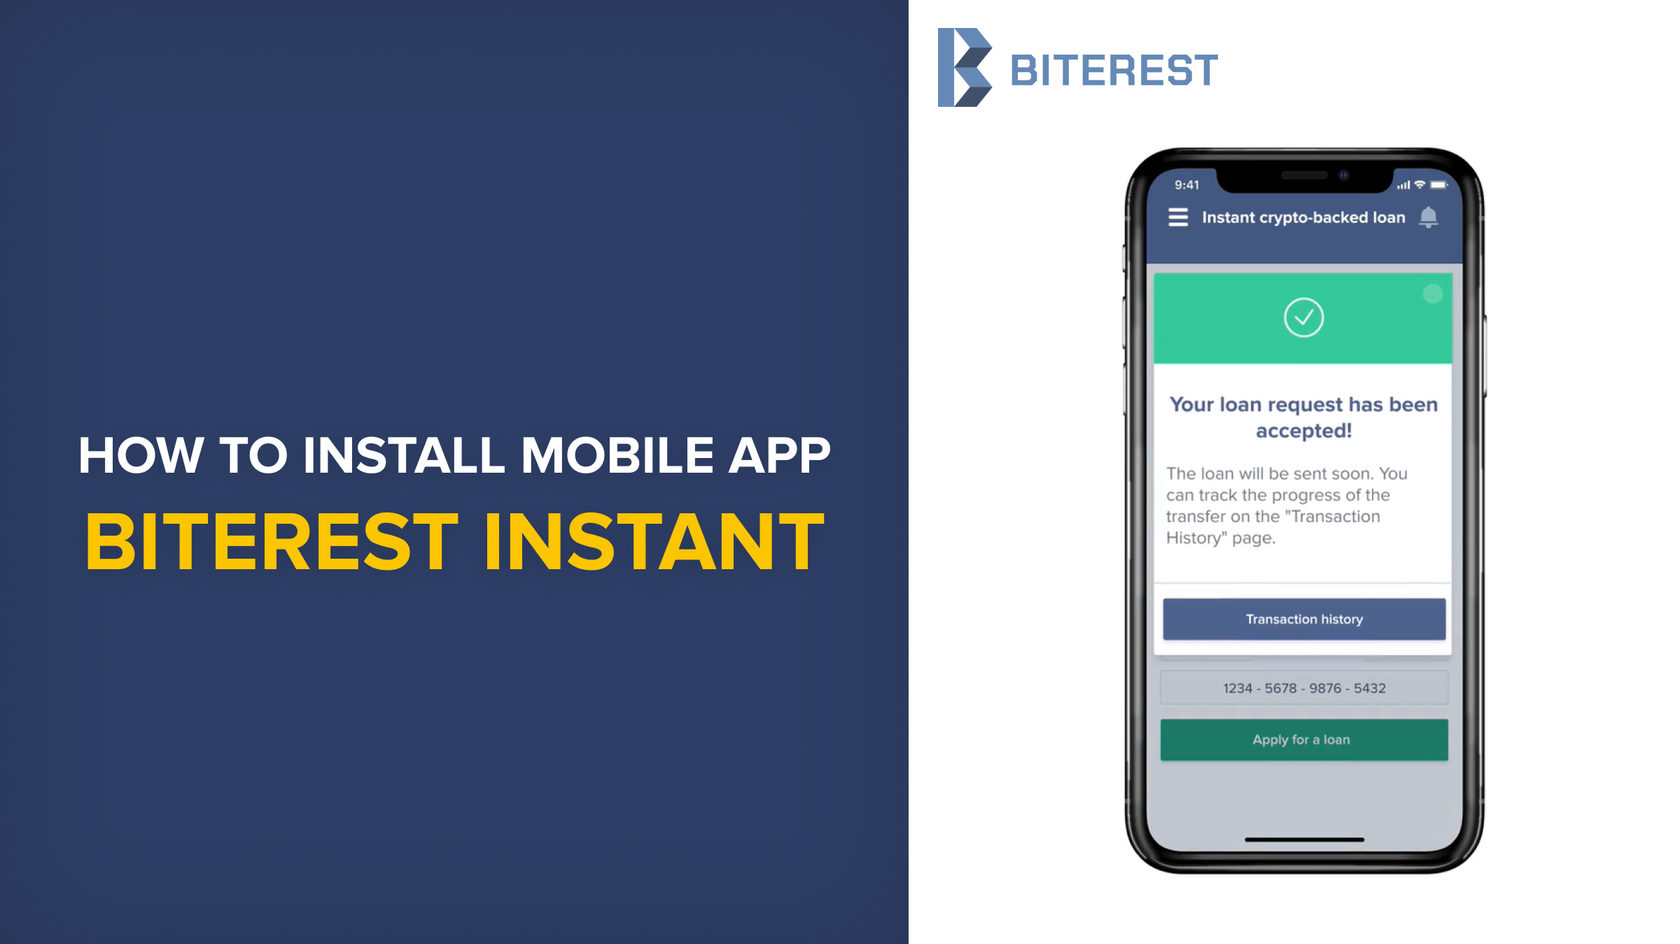 Biterest app is now available for Android, iOS and Windows